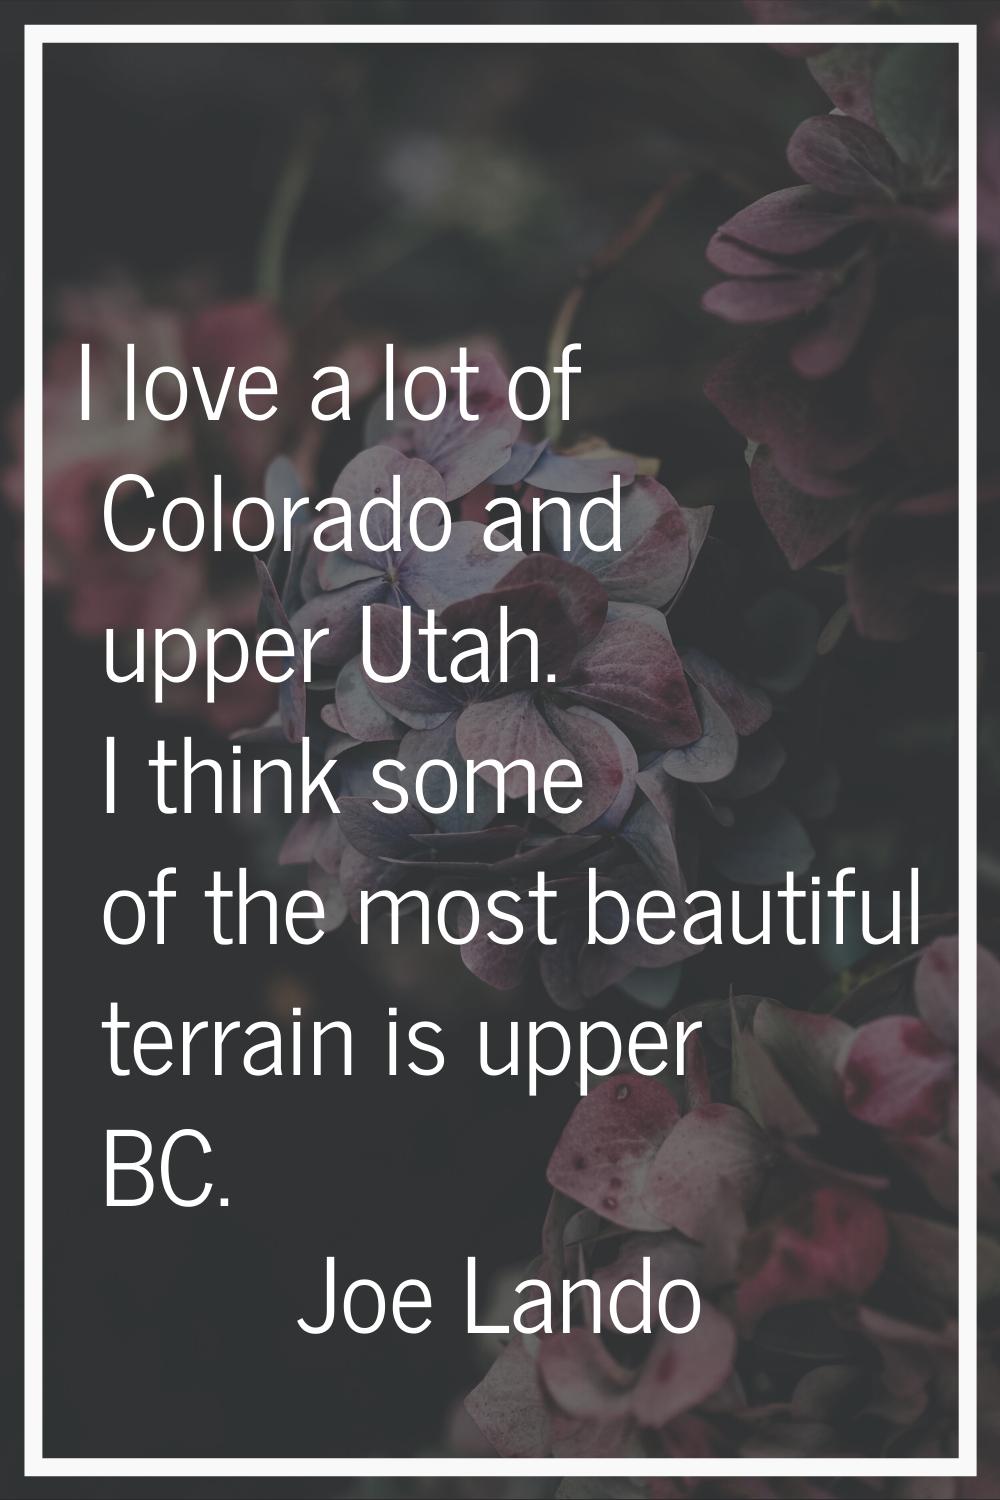 I love a lot of Colorado and upper Utah. I think some of the most beautiful terrain is upper BC.